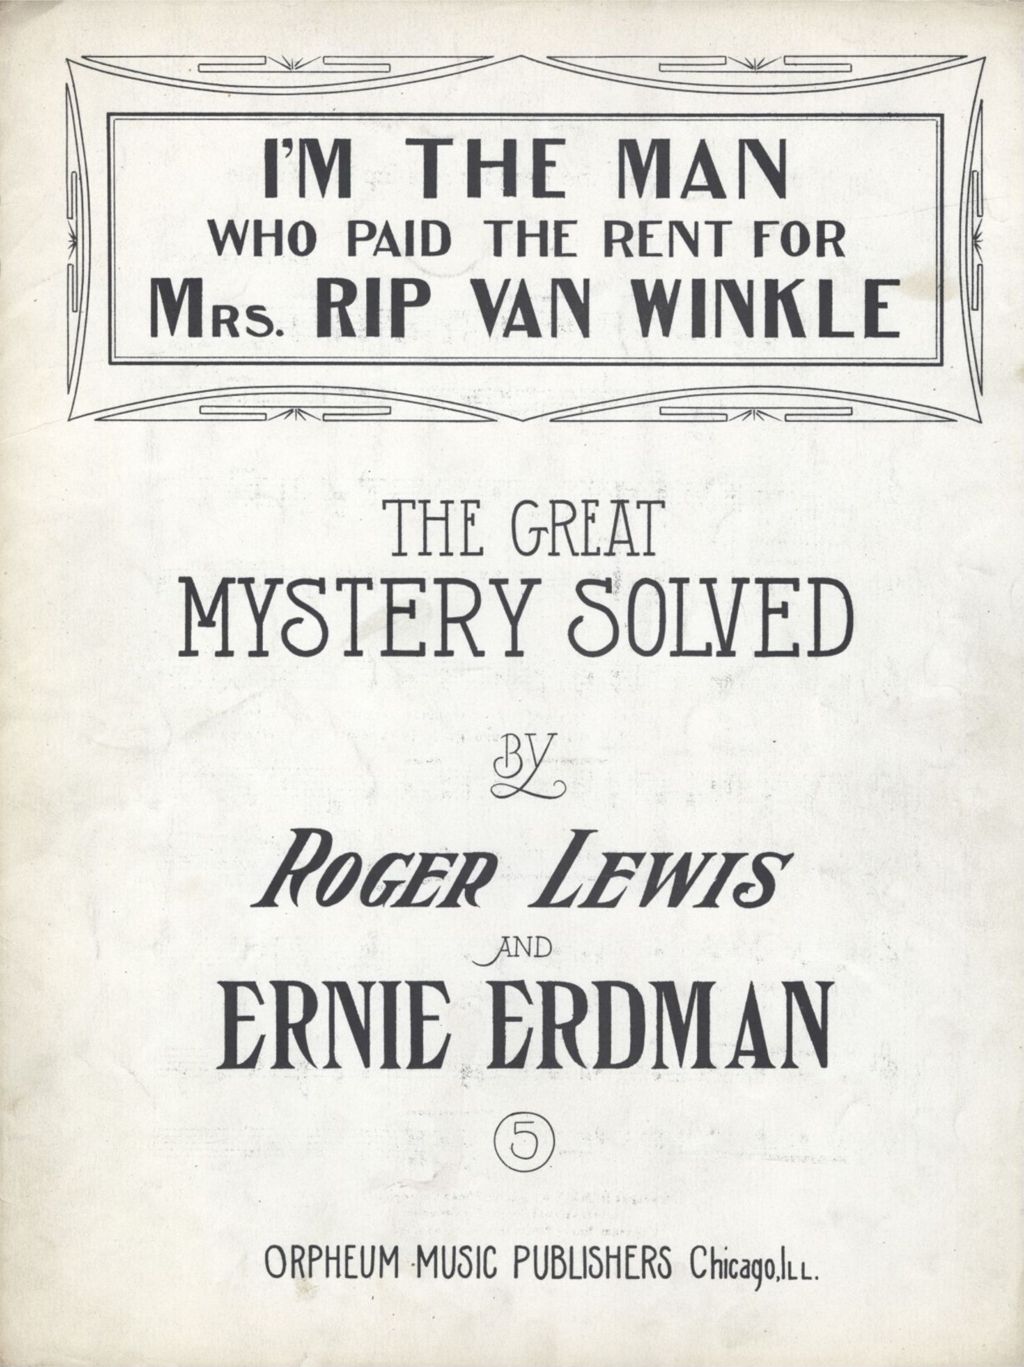 Miniature of I'm the Man Who Paid the Rent for Mrs. Rip Van Winkle